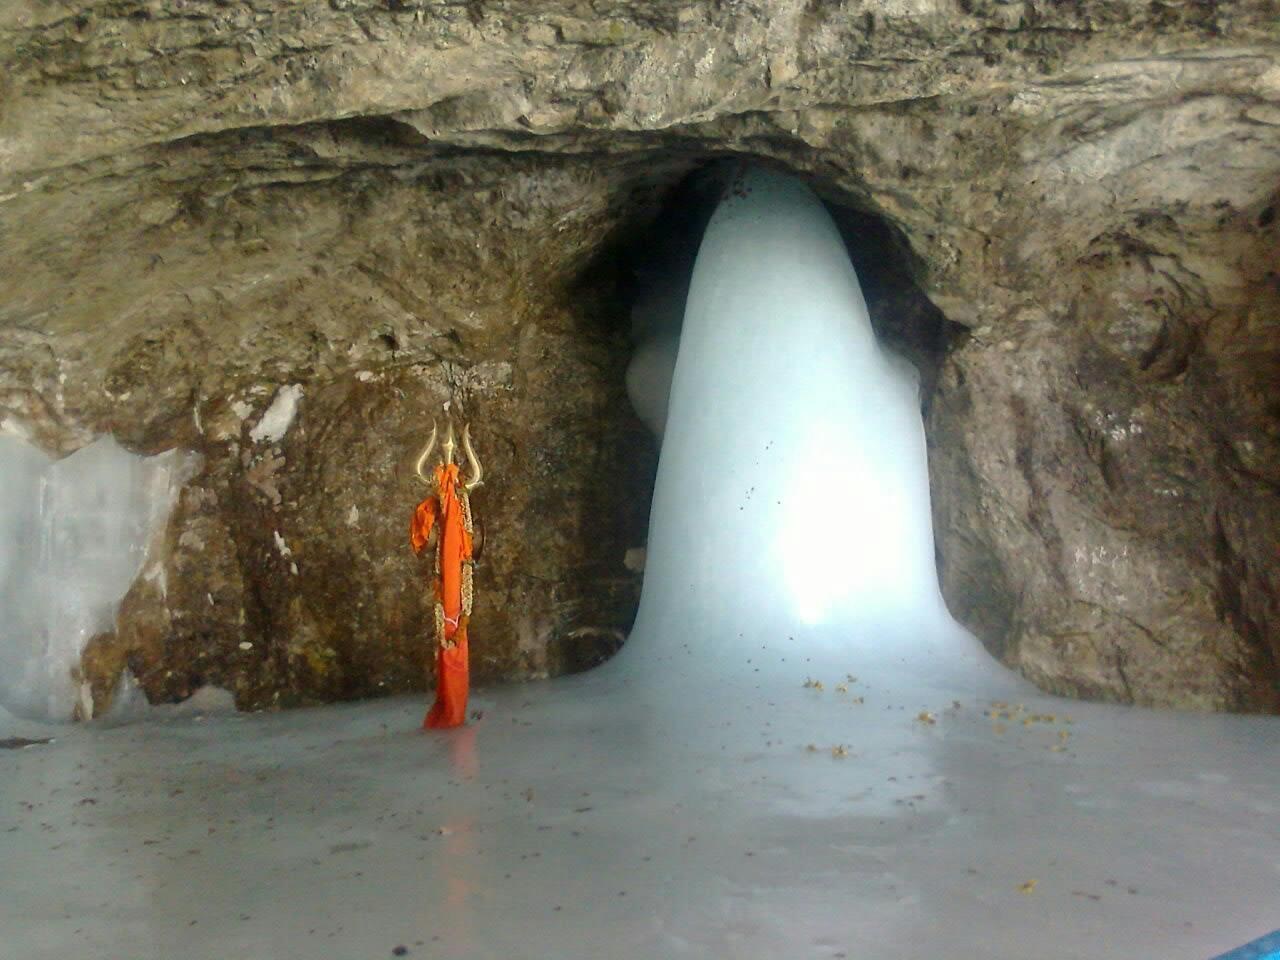 Amarnath Yatra is starting again after two years